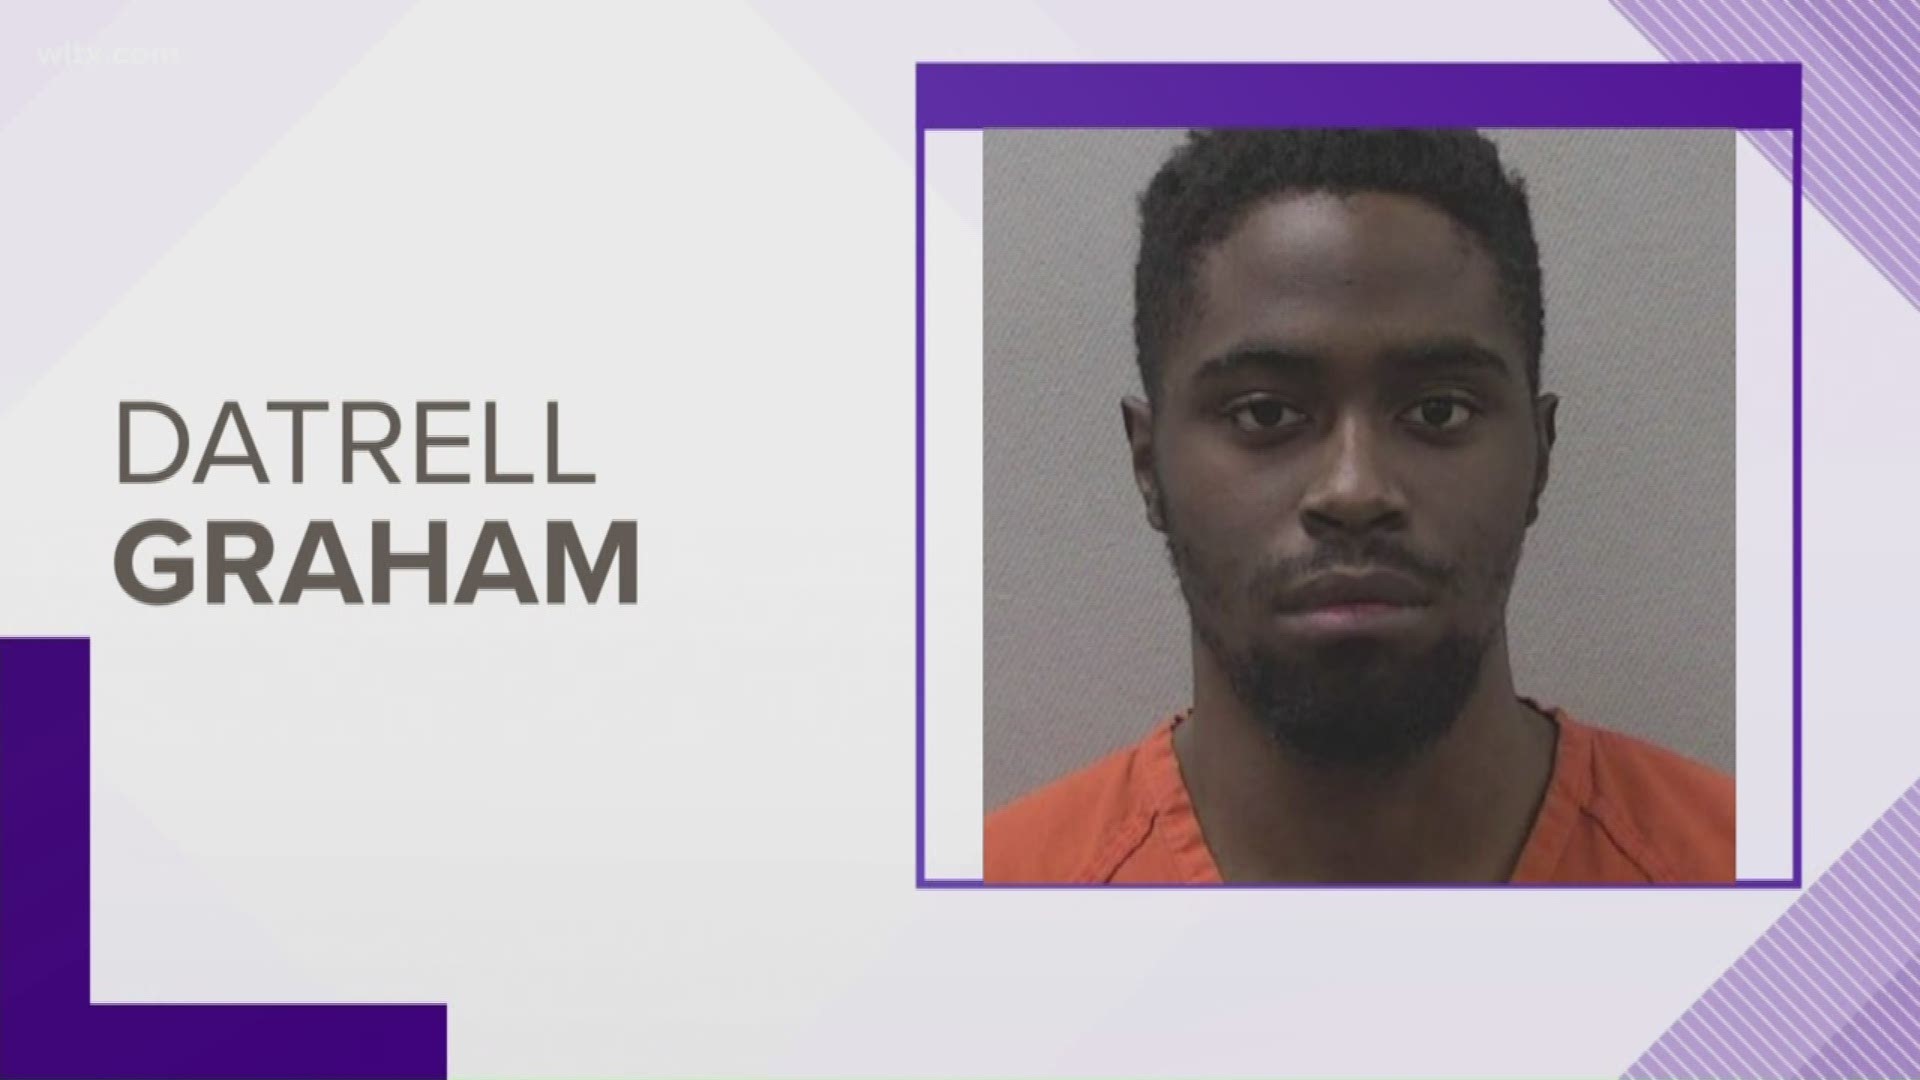 Deputies say that Datrell Graham, 20, sold and smoked marijuana in front of children.